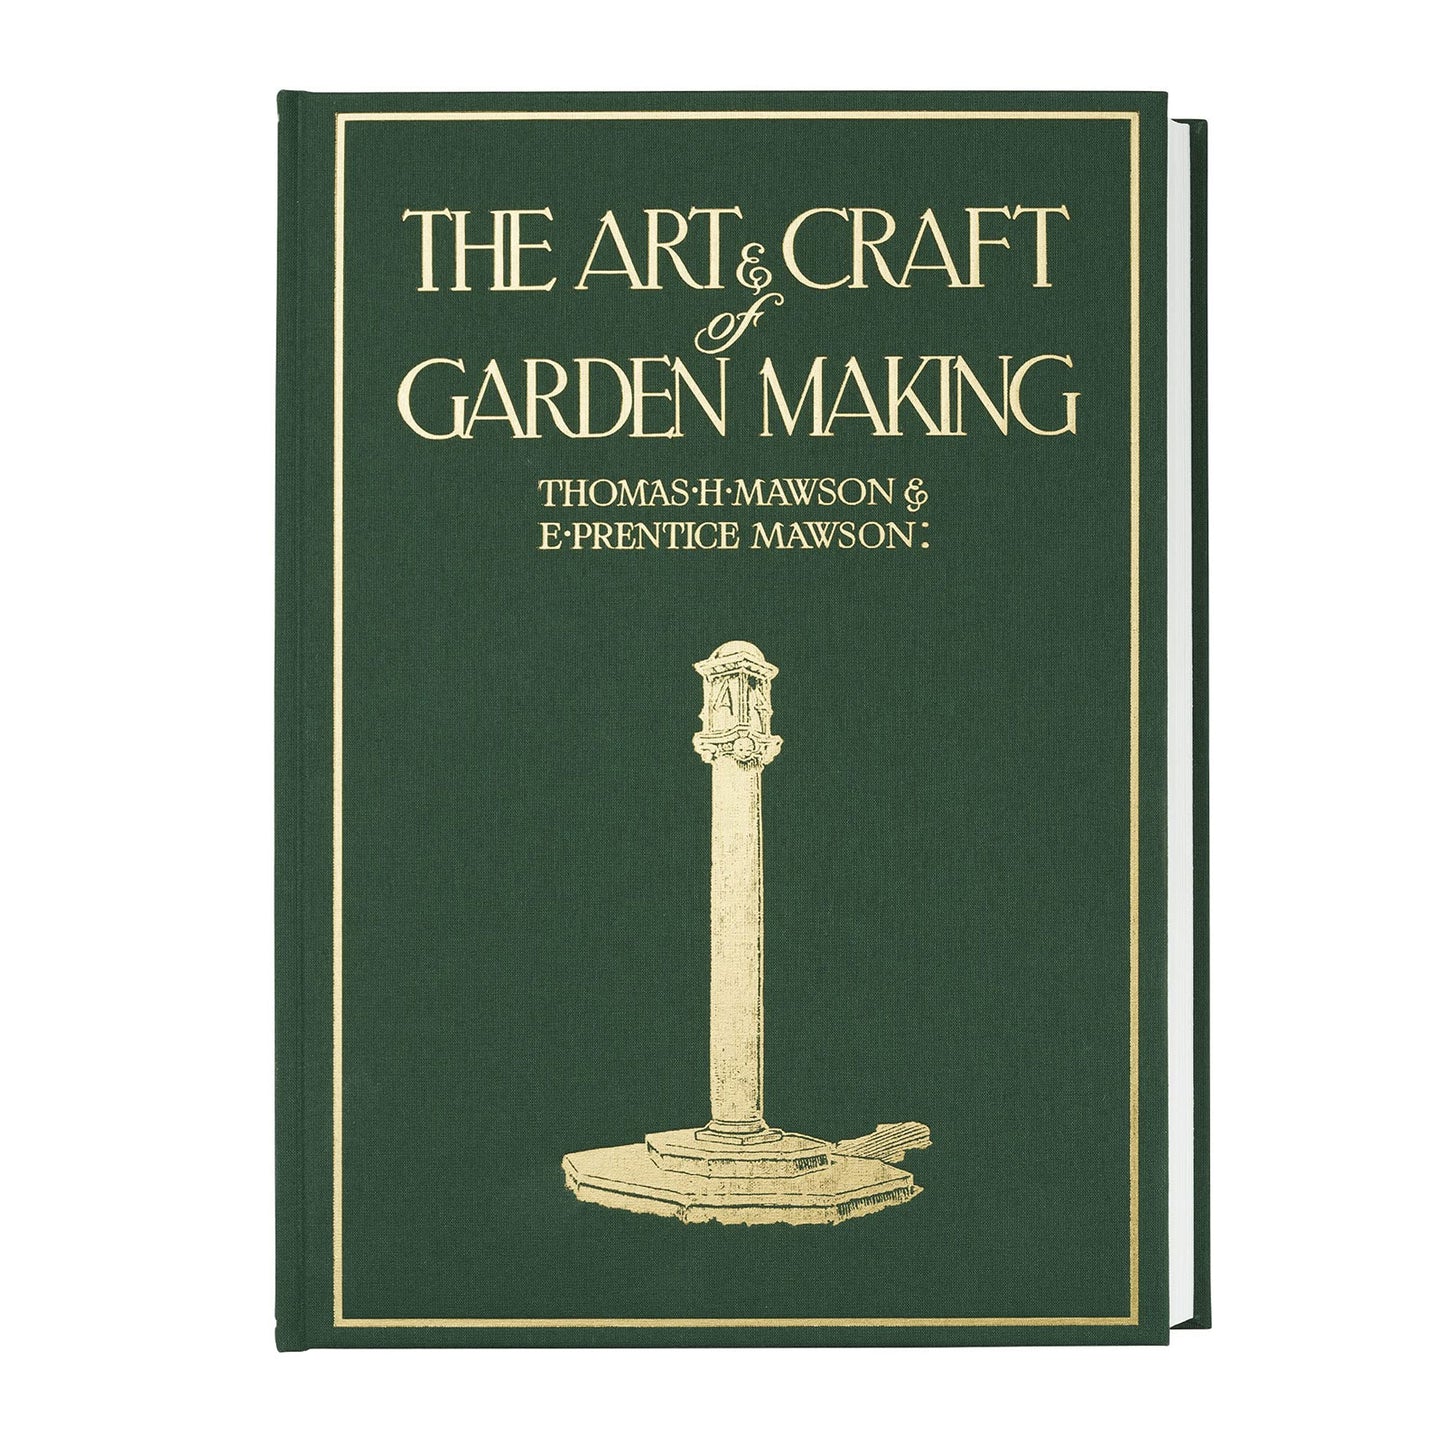 The Art and Craft of Garden Making